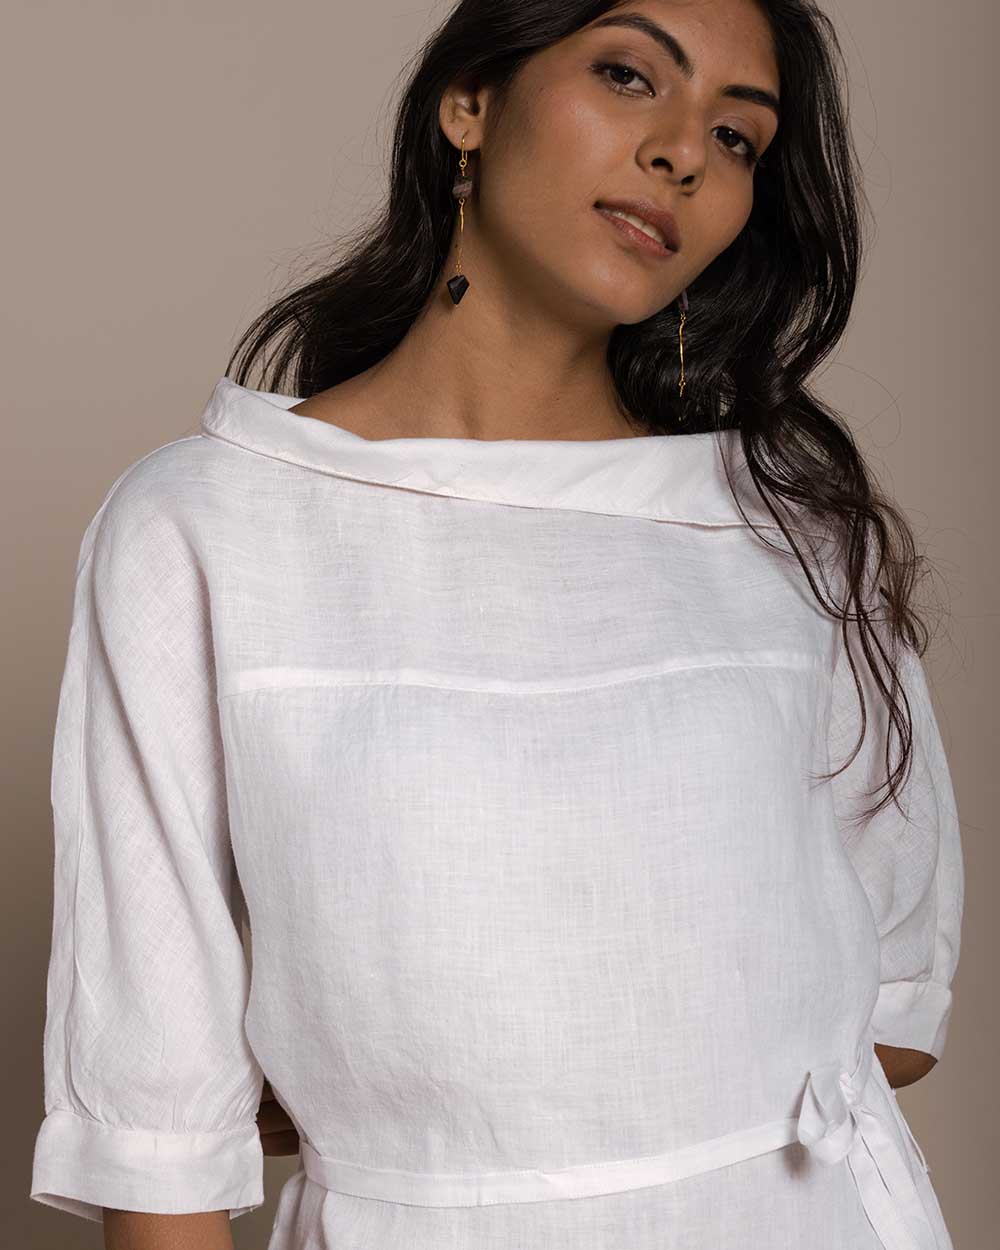 Let's Stay Home Top - Coconut White at Kamakhyaa by Reistor. This item is Blouses, Casual Wear, Hemp, Natural, Office Wear, Solids, Tops, White, Womenswear